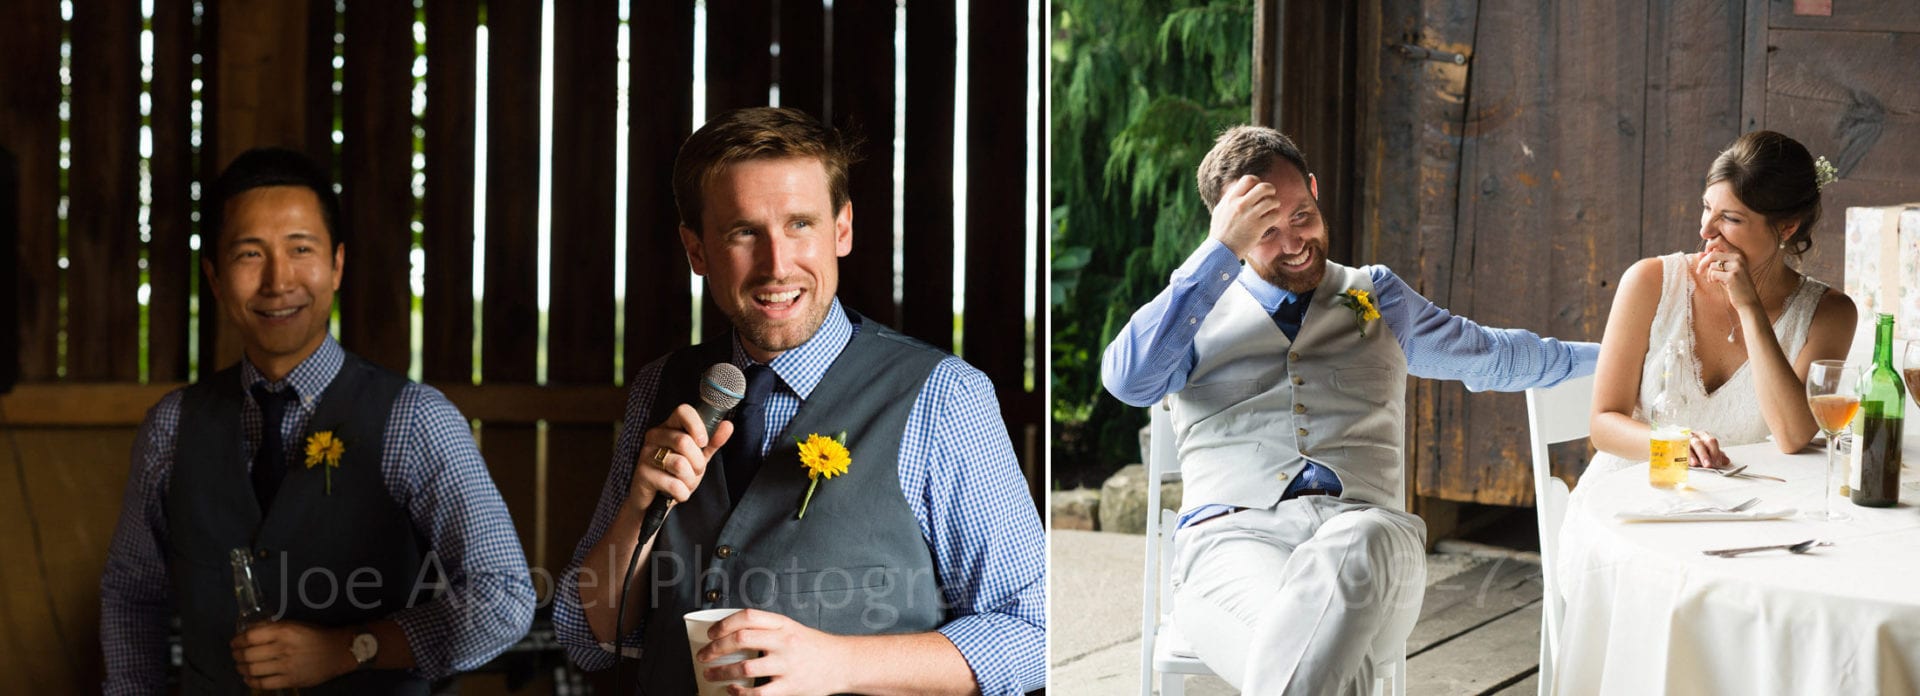 Two photos: two groomsmen stand and give a toast to a groom. In the second photo the groom laughs while holding his hand to his forehead. He's seated with his bride at a table in the doorway of a barn.